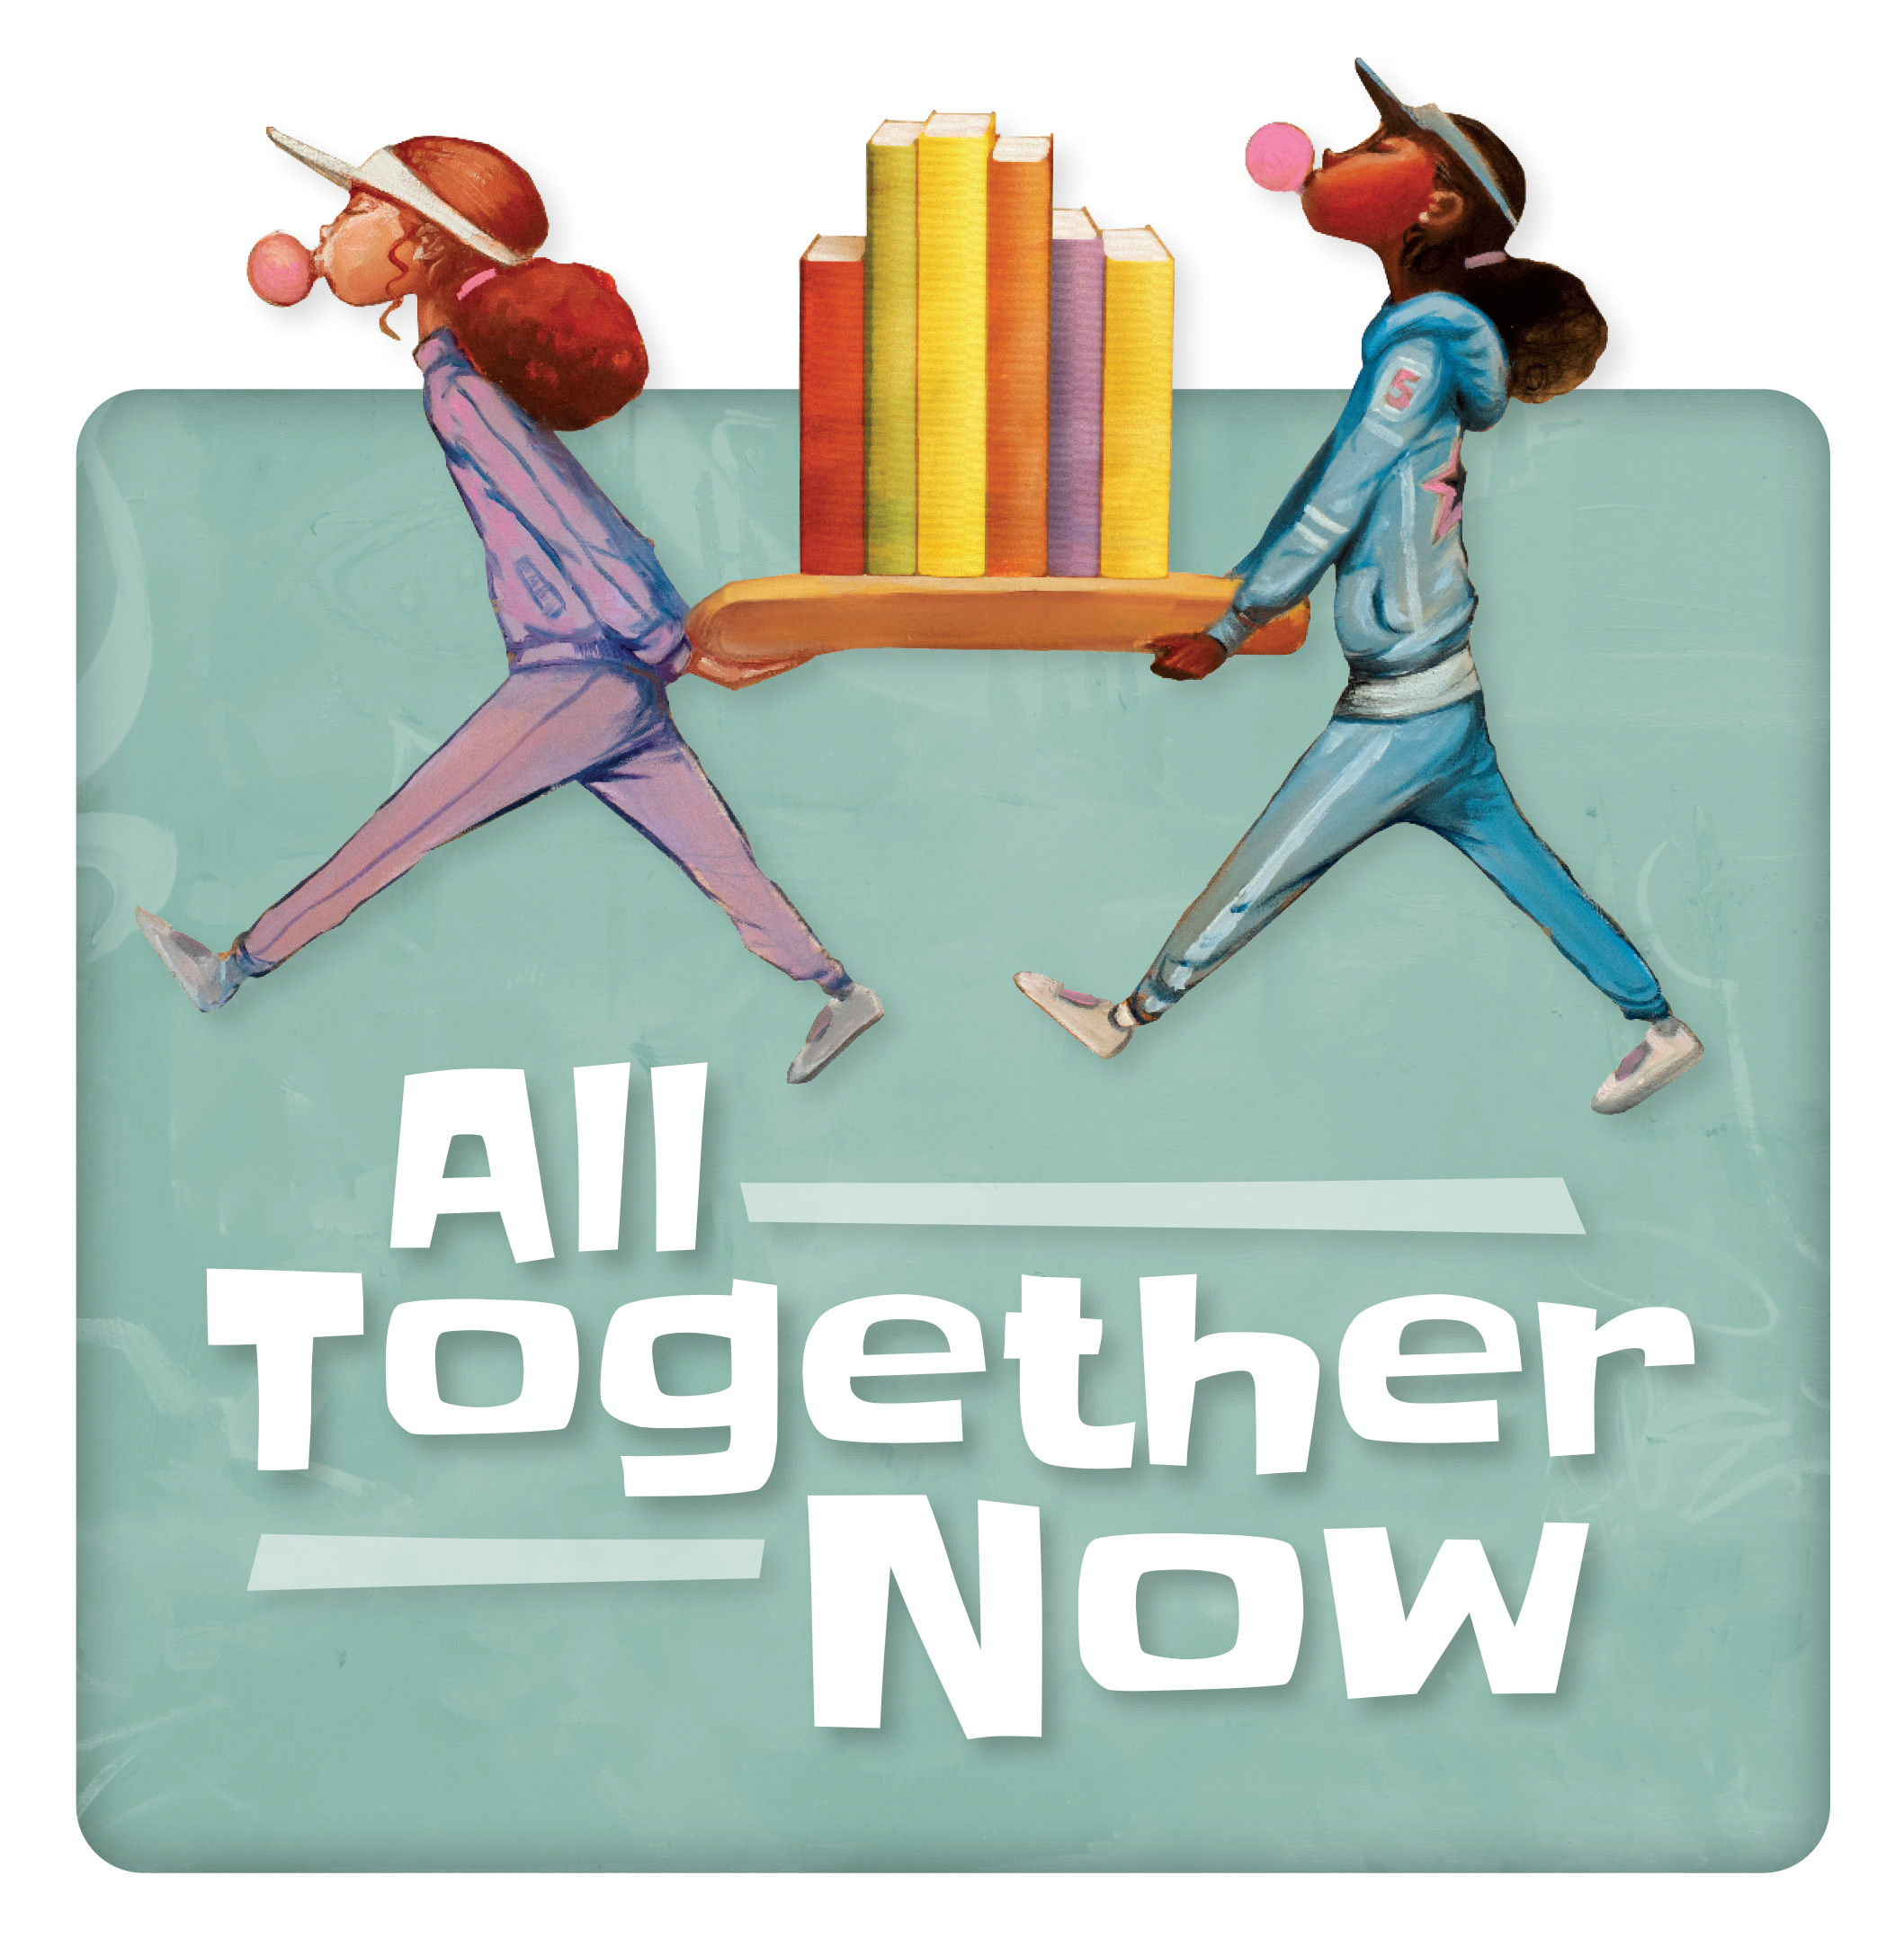 Summer Reading slogan, "all together now"